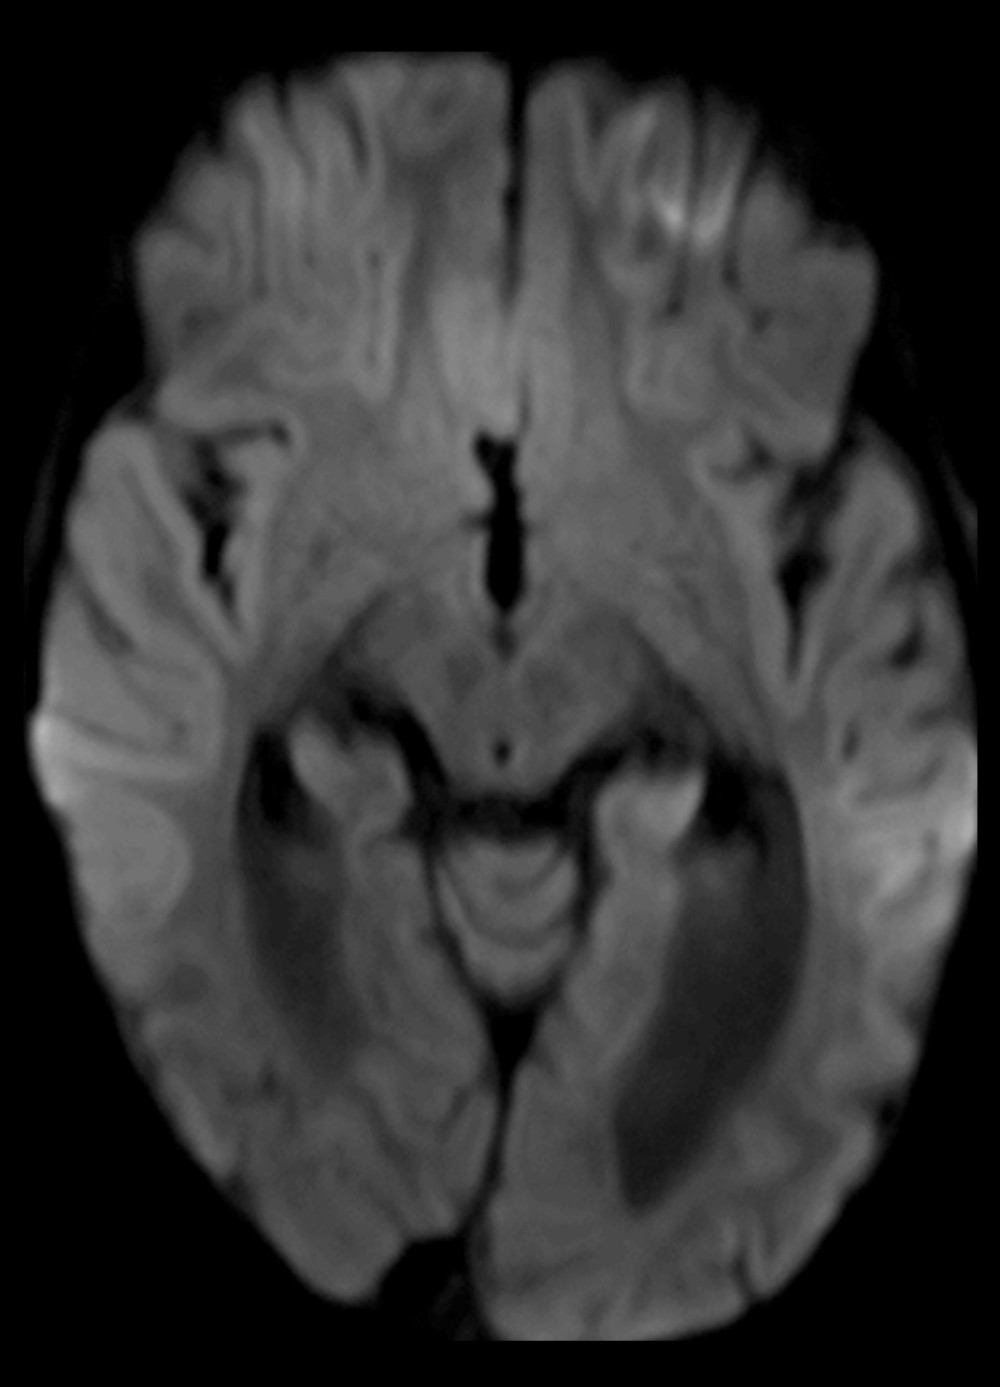 Diffusion-weighted image at 5 months after presentation. Cortical diffusion restriction is absent.